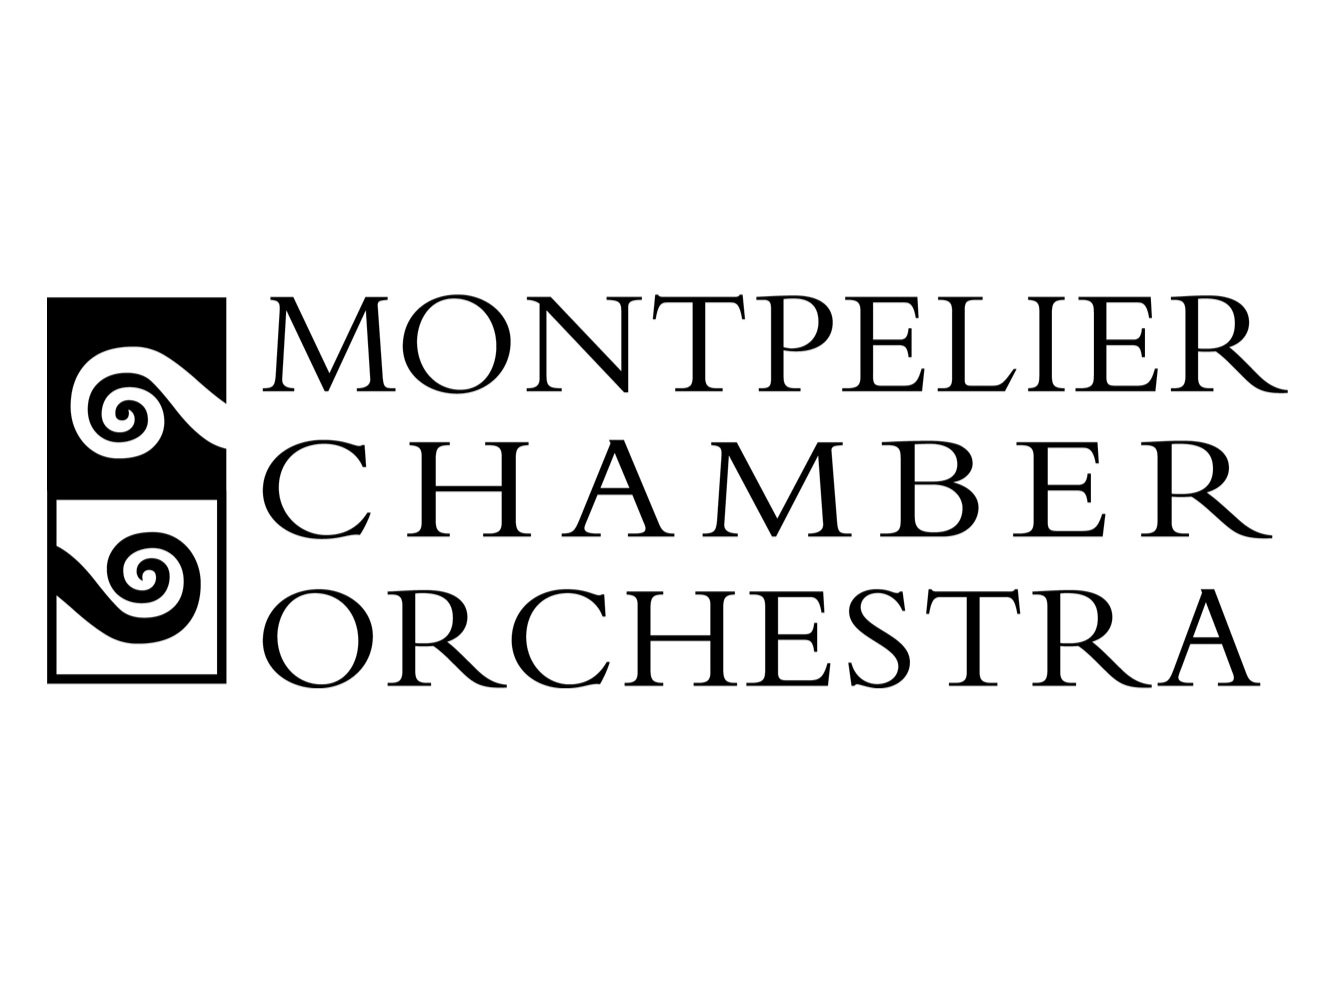 Montpelier Chamber Orchestra